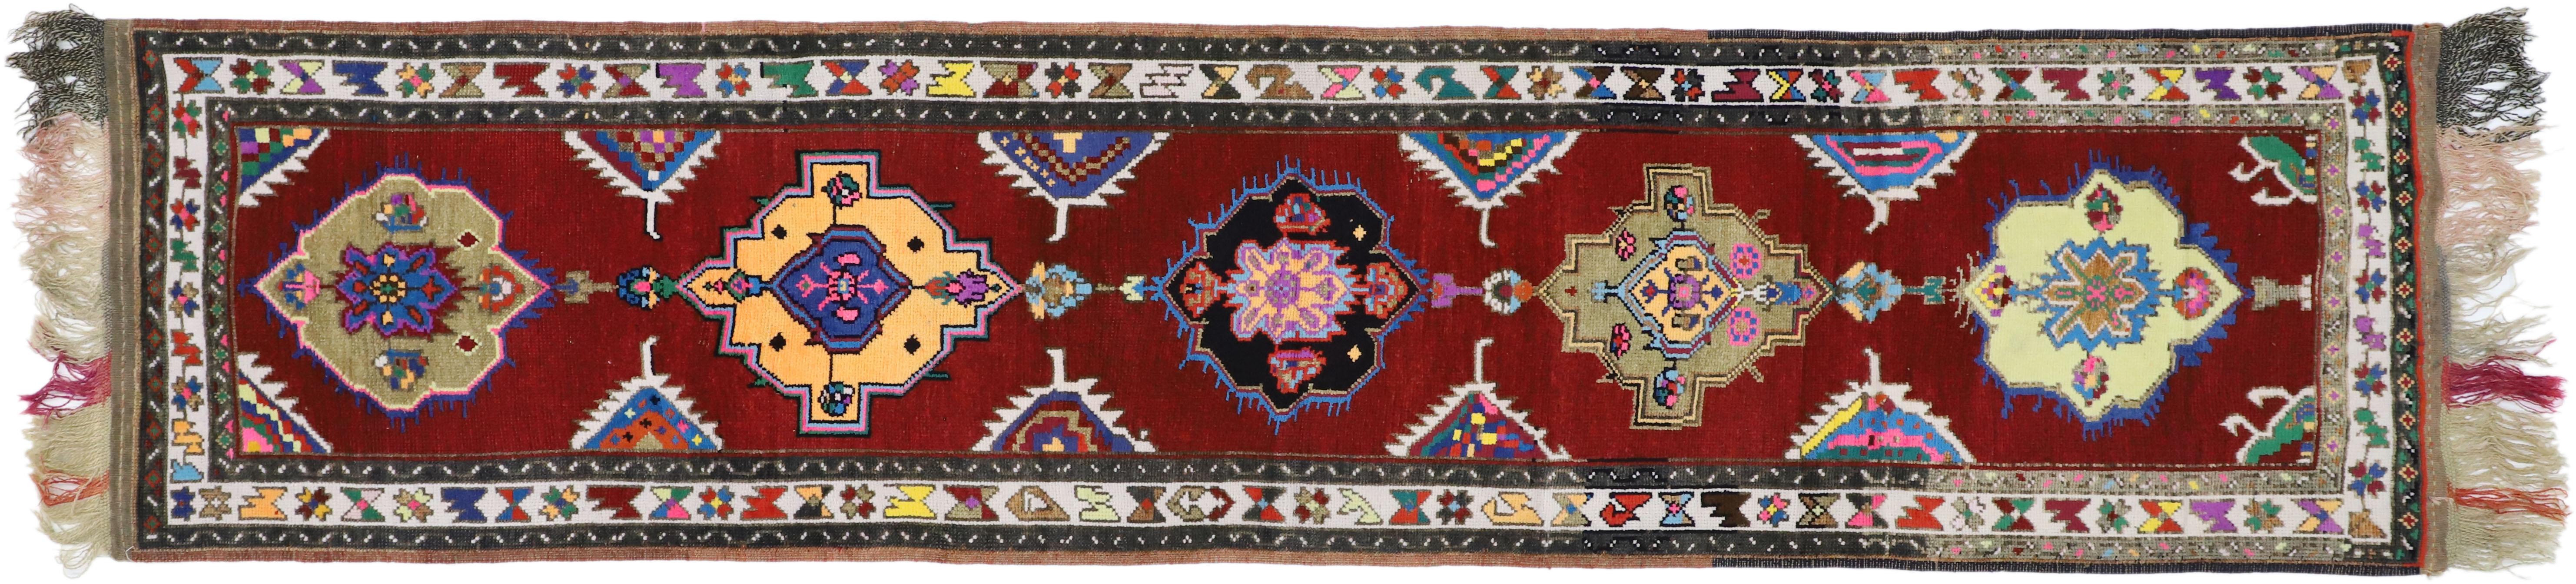 Vintage Turkish Oushak Runner with Retro Bold Art Deco Style For Sale 3